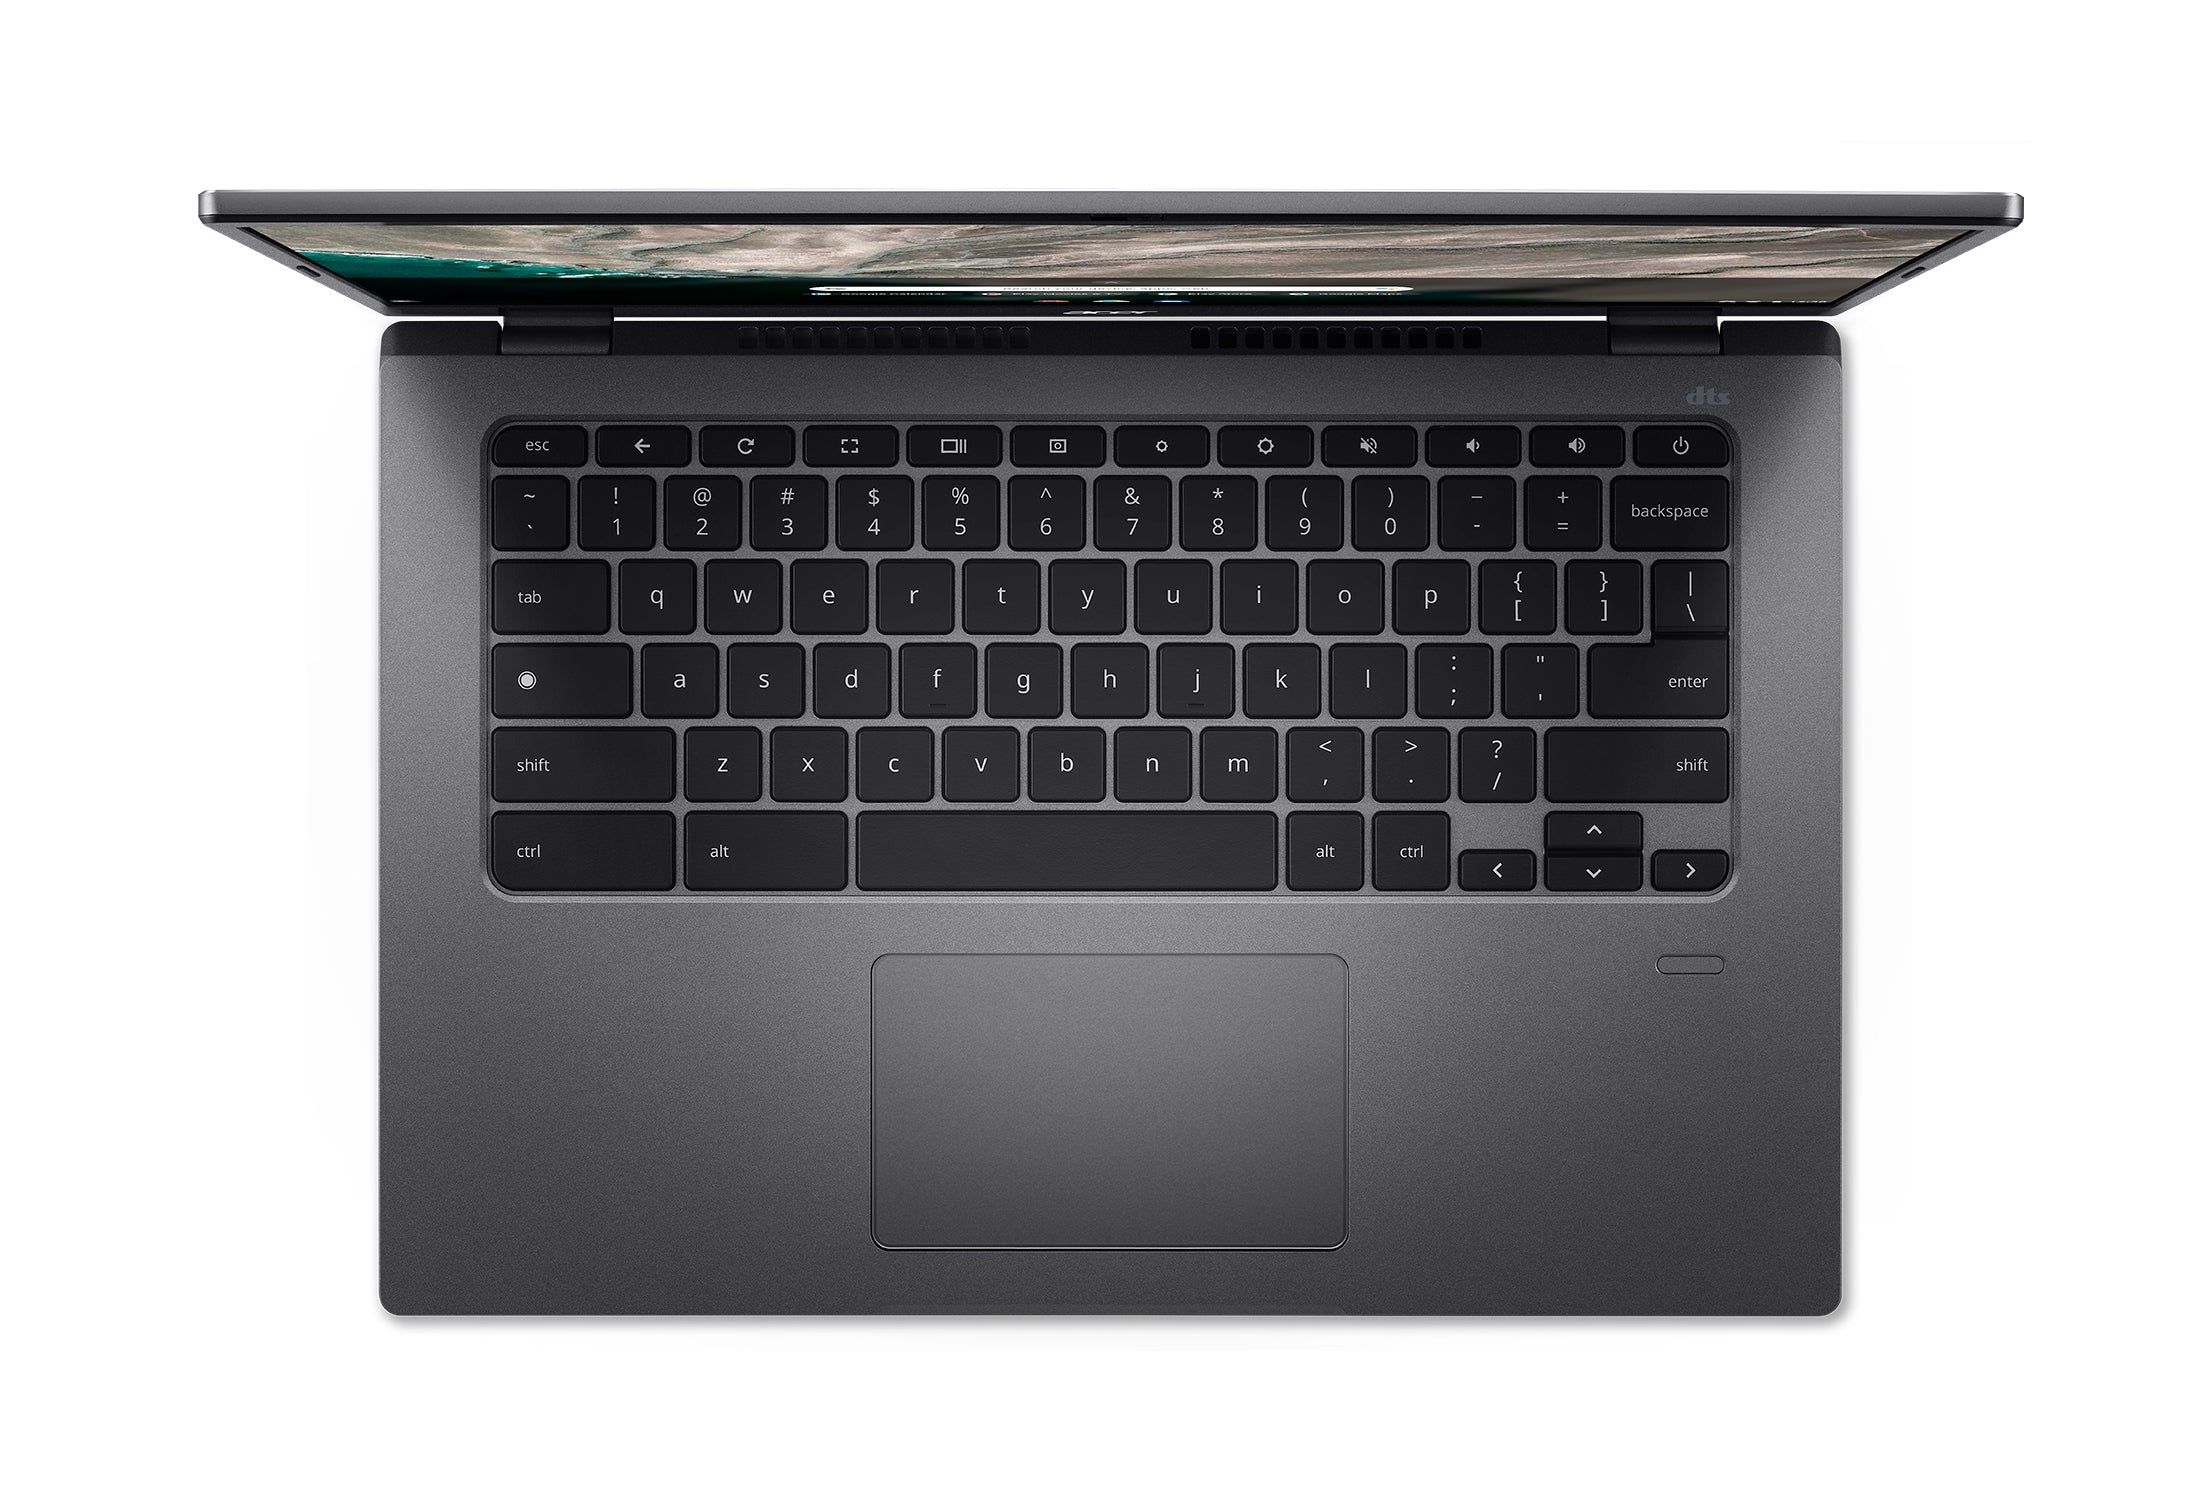 Laptop Acer Chromebook 514 Cb514-1W-3137 For Professionals / Core I3 1115G4 Dc 3.00Ghz / 8Gb / 128Gb Ssd Pcie Nvme / 14 Fhd Ips / Chrome / Gris Metal